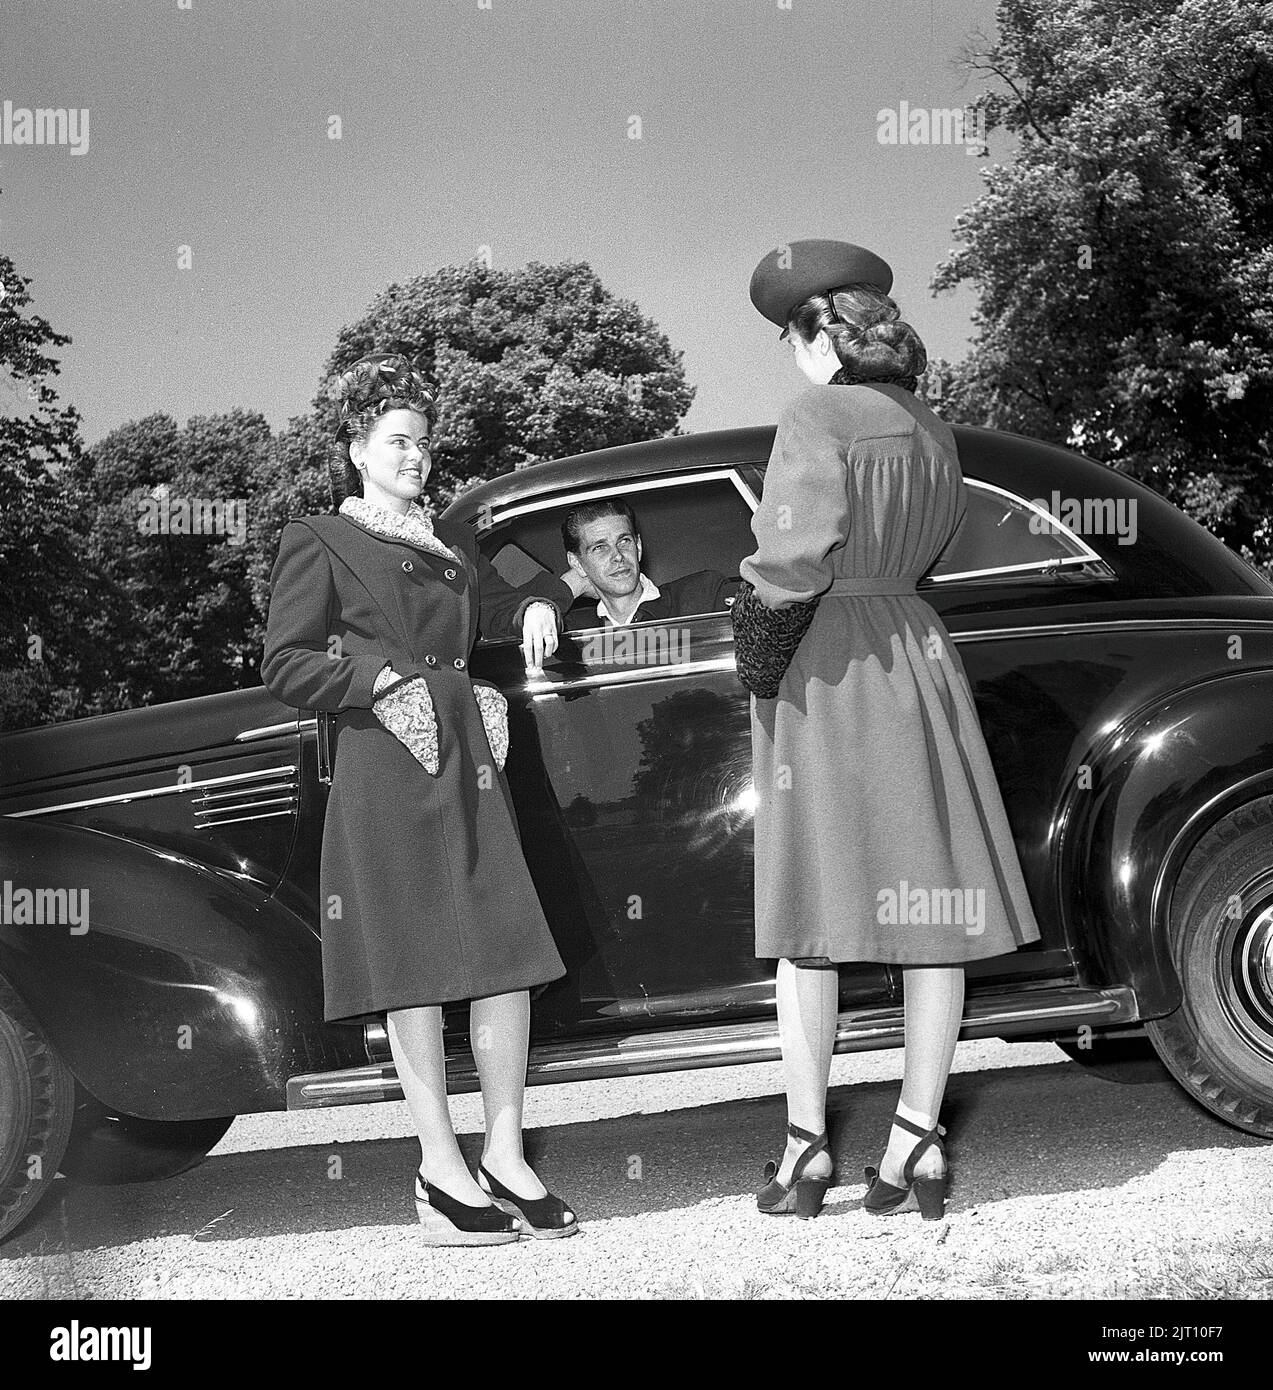 Women's fashion in the 1940s. Two young women in  typical 1940s outfits. Warm coat, matching shoes and hat. They are pictured beside a car talking to the male driver. Sweden 1946. Kristoffersson Ref U128-5 Stock Photo